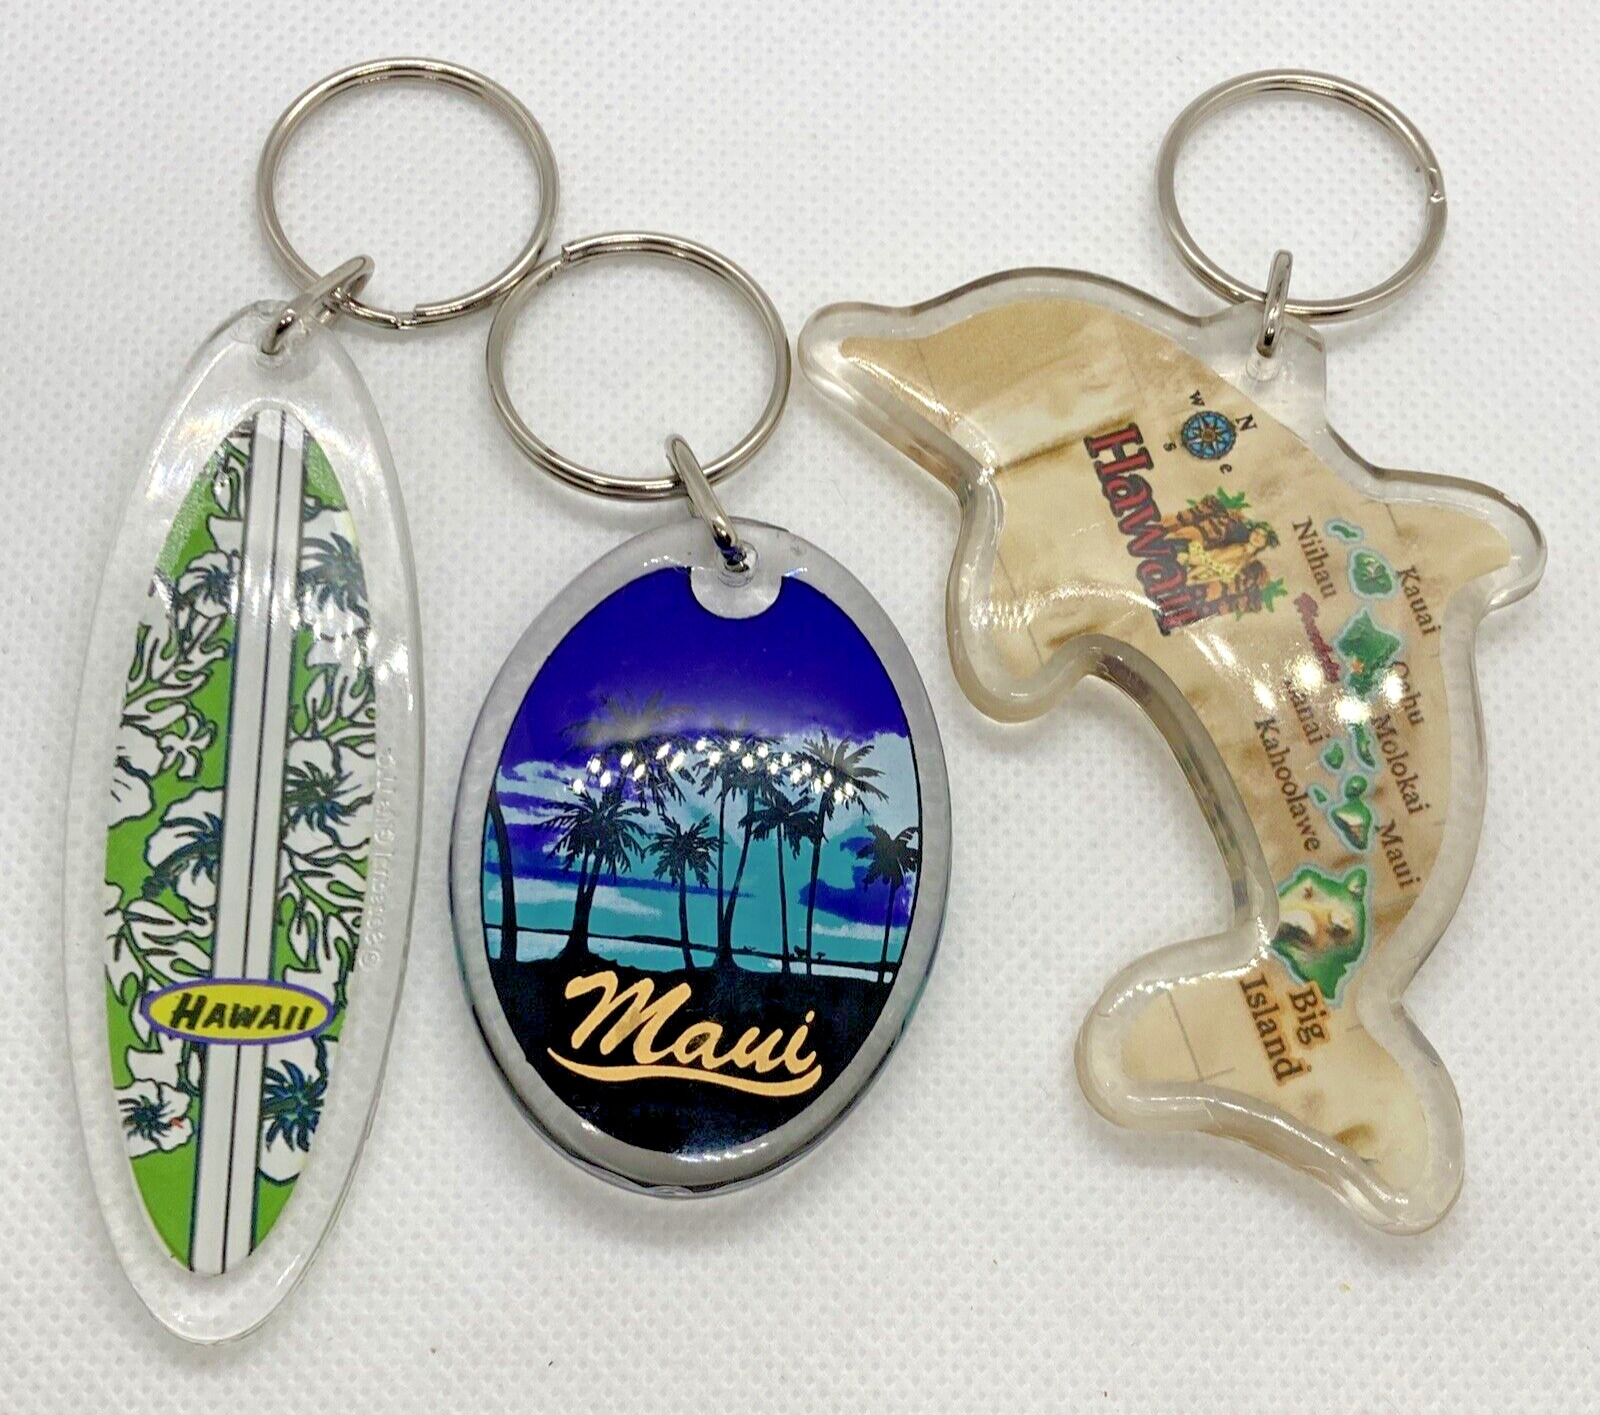 Lot of 3 Hawaii Plastic Keychains Surfboard Dolphin Maui Travel Gift Tourism